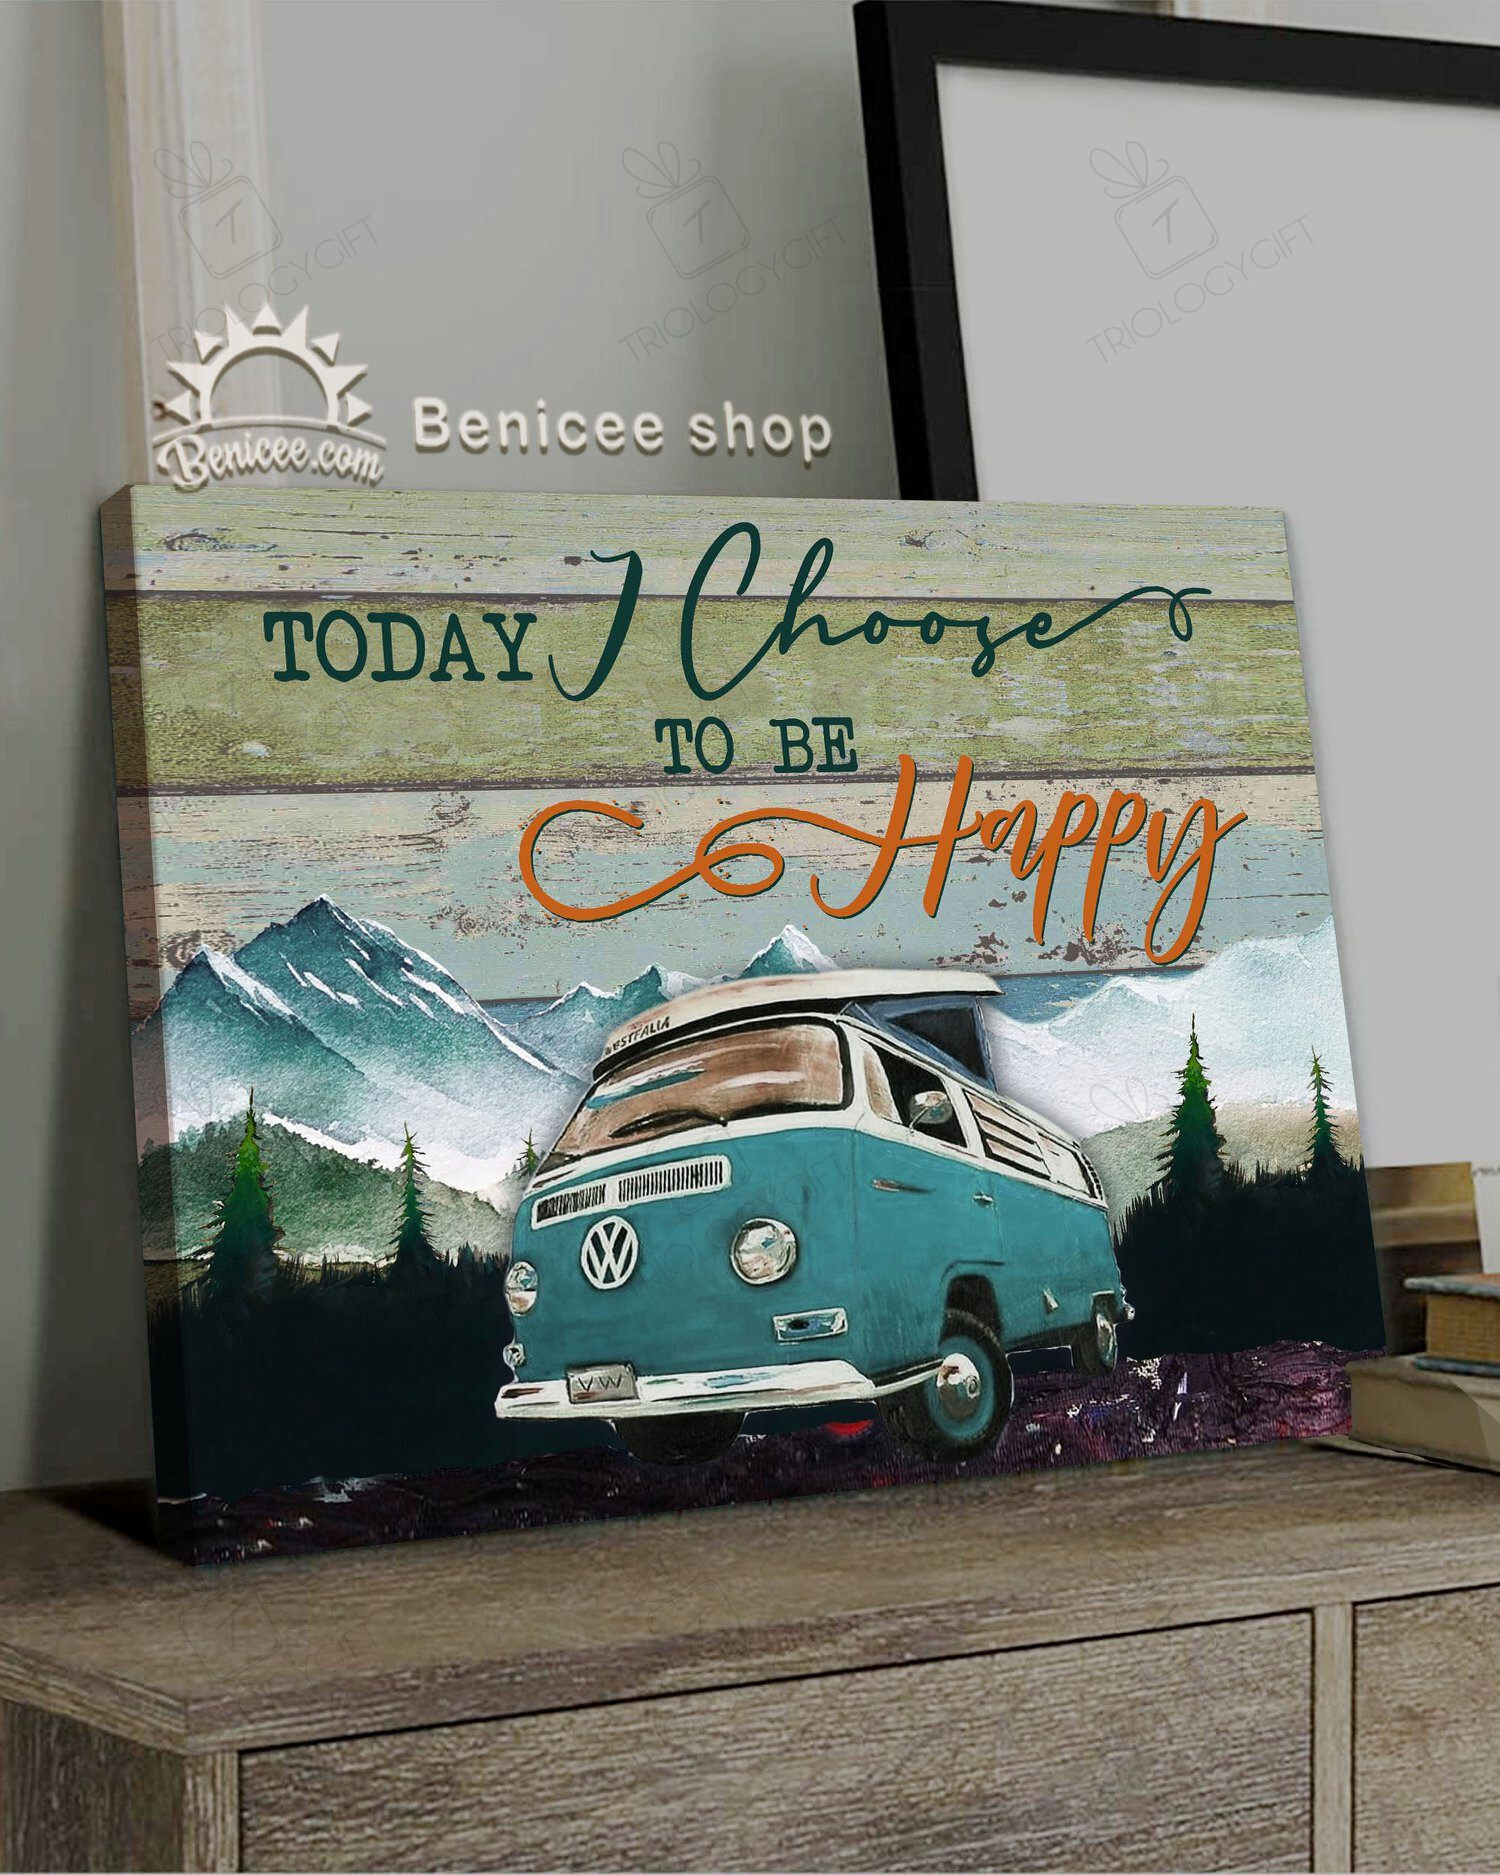 Benicee Top Camping Decor Today I Choose To Be Happy Vw Camper Van Poster 18x12in